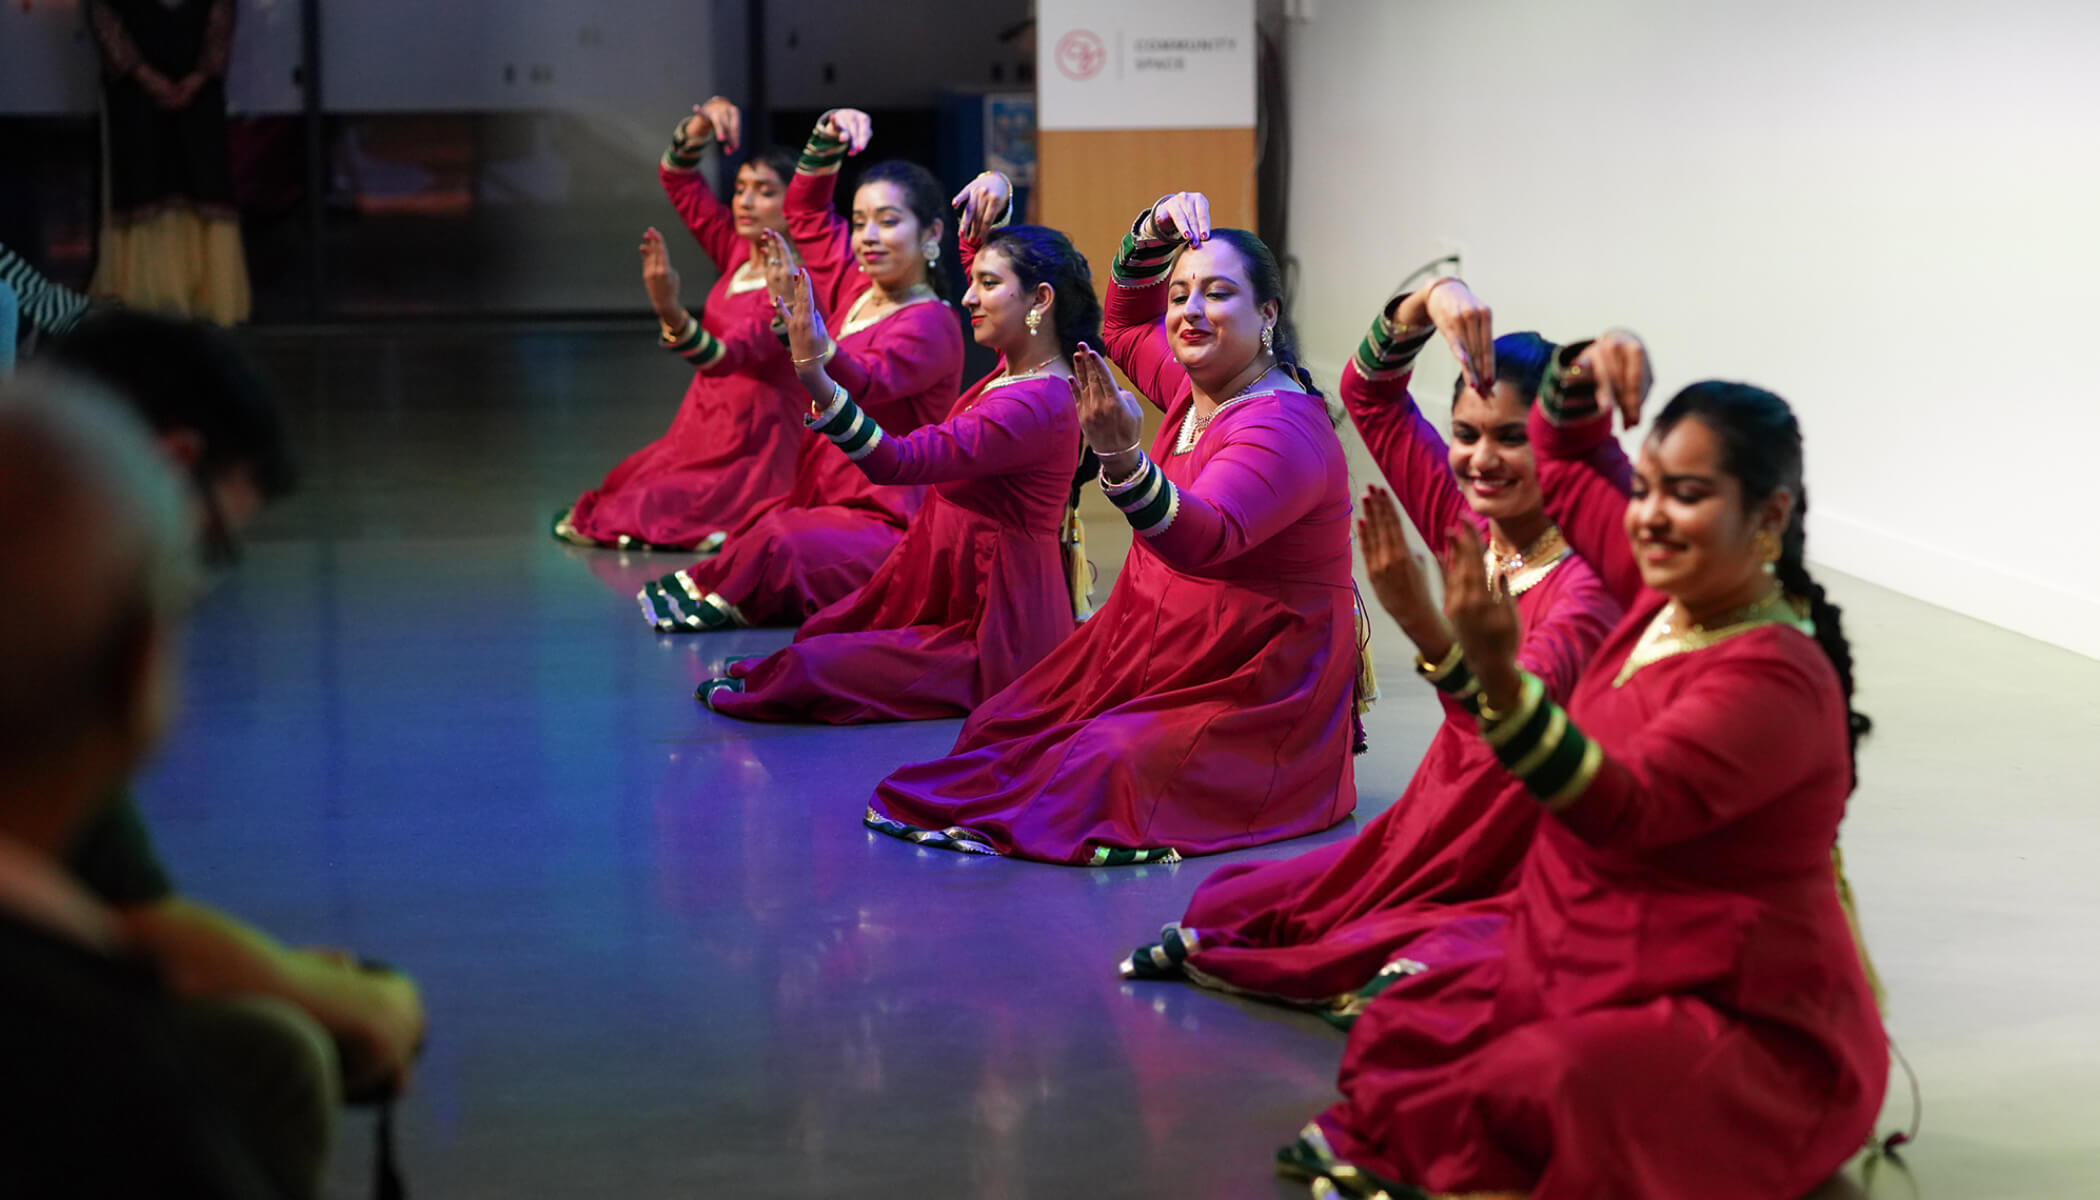 Women in pink sit on the floor during a dance performance.